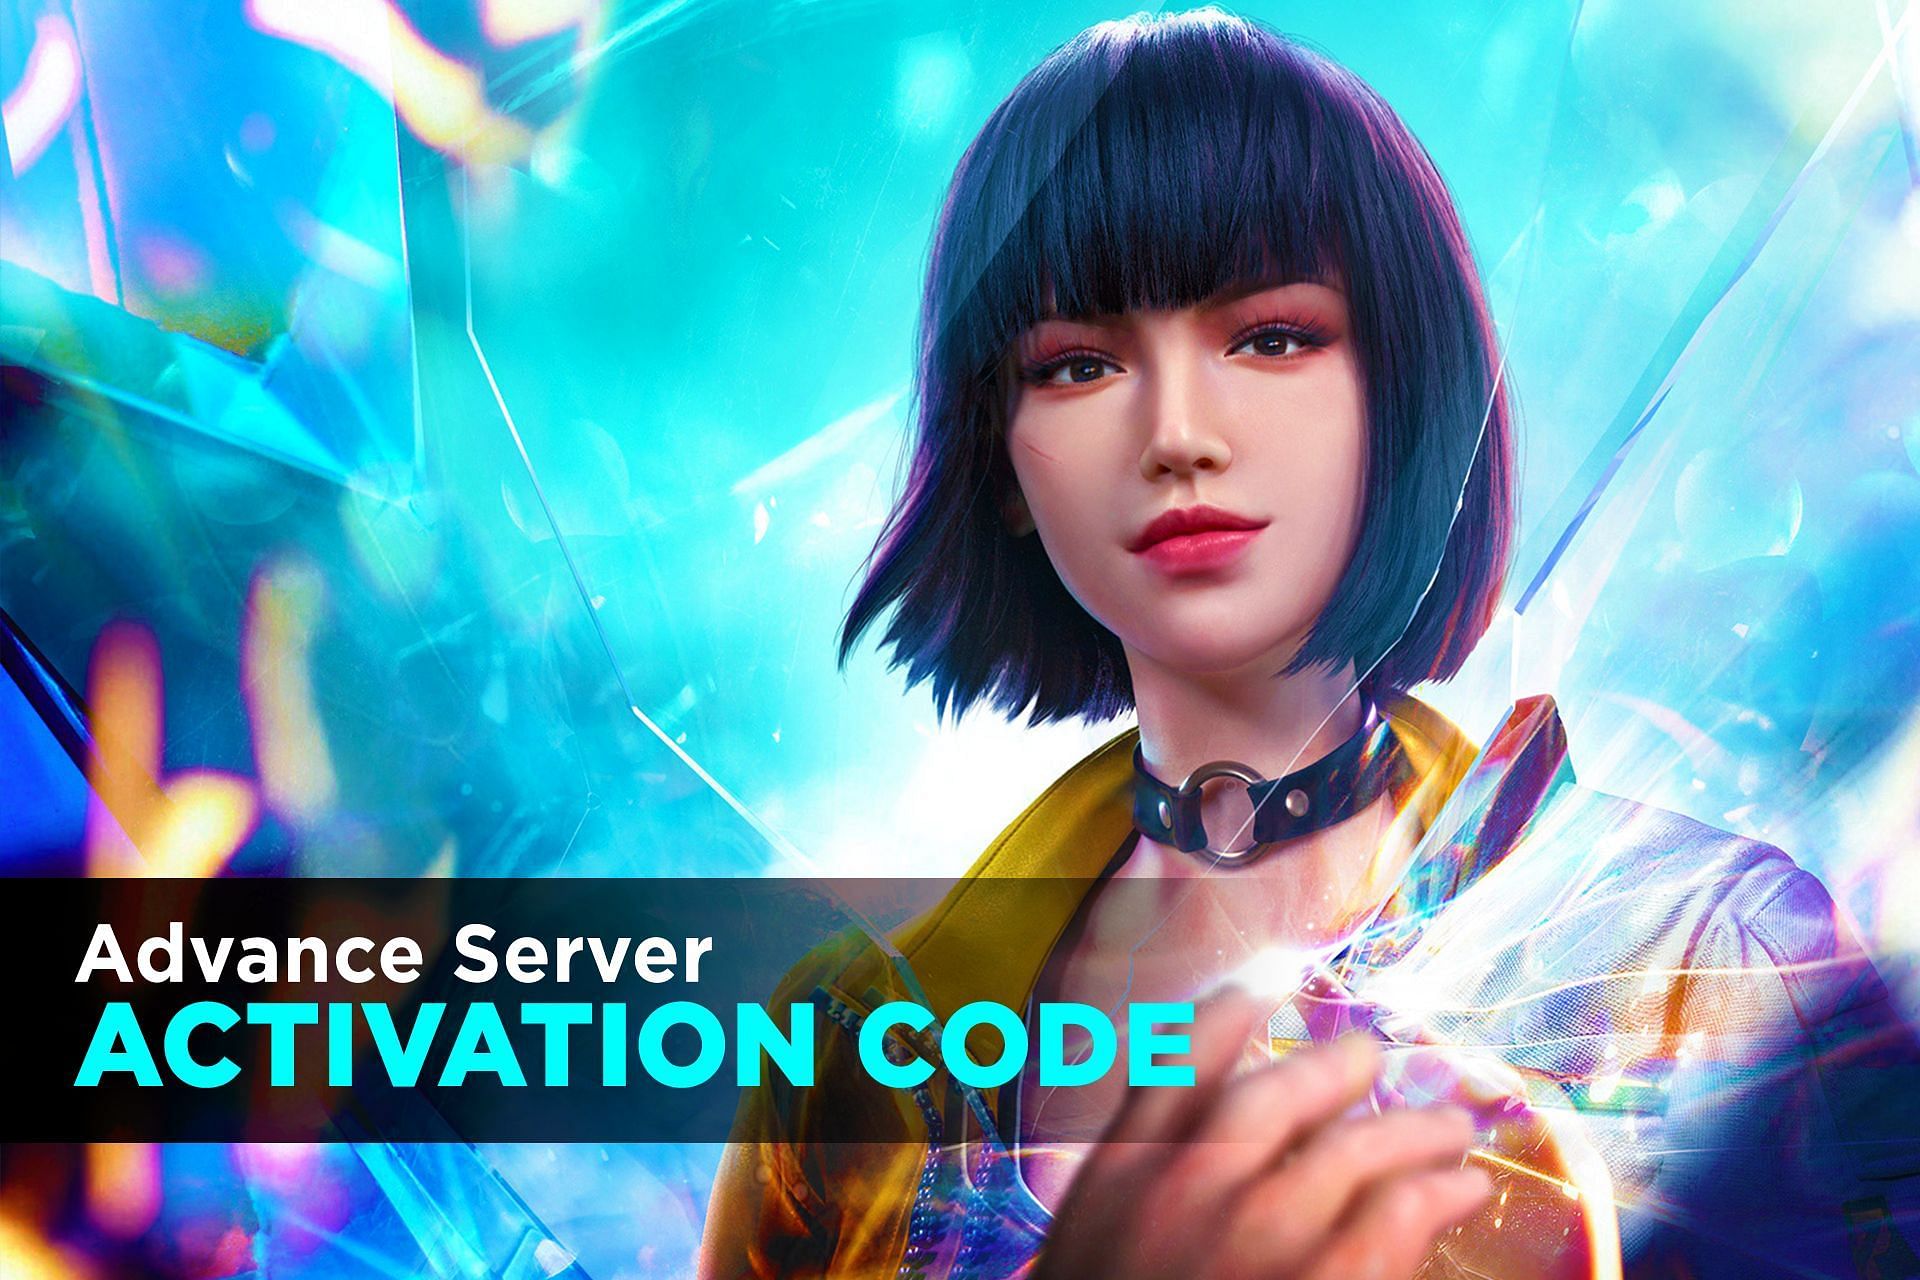 Activation Code will be available to selected registered users (Image via Garena)